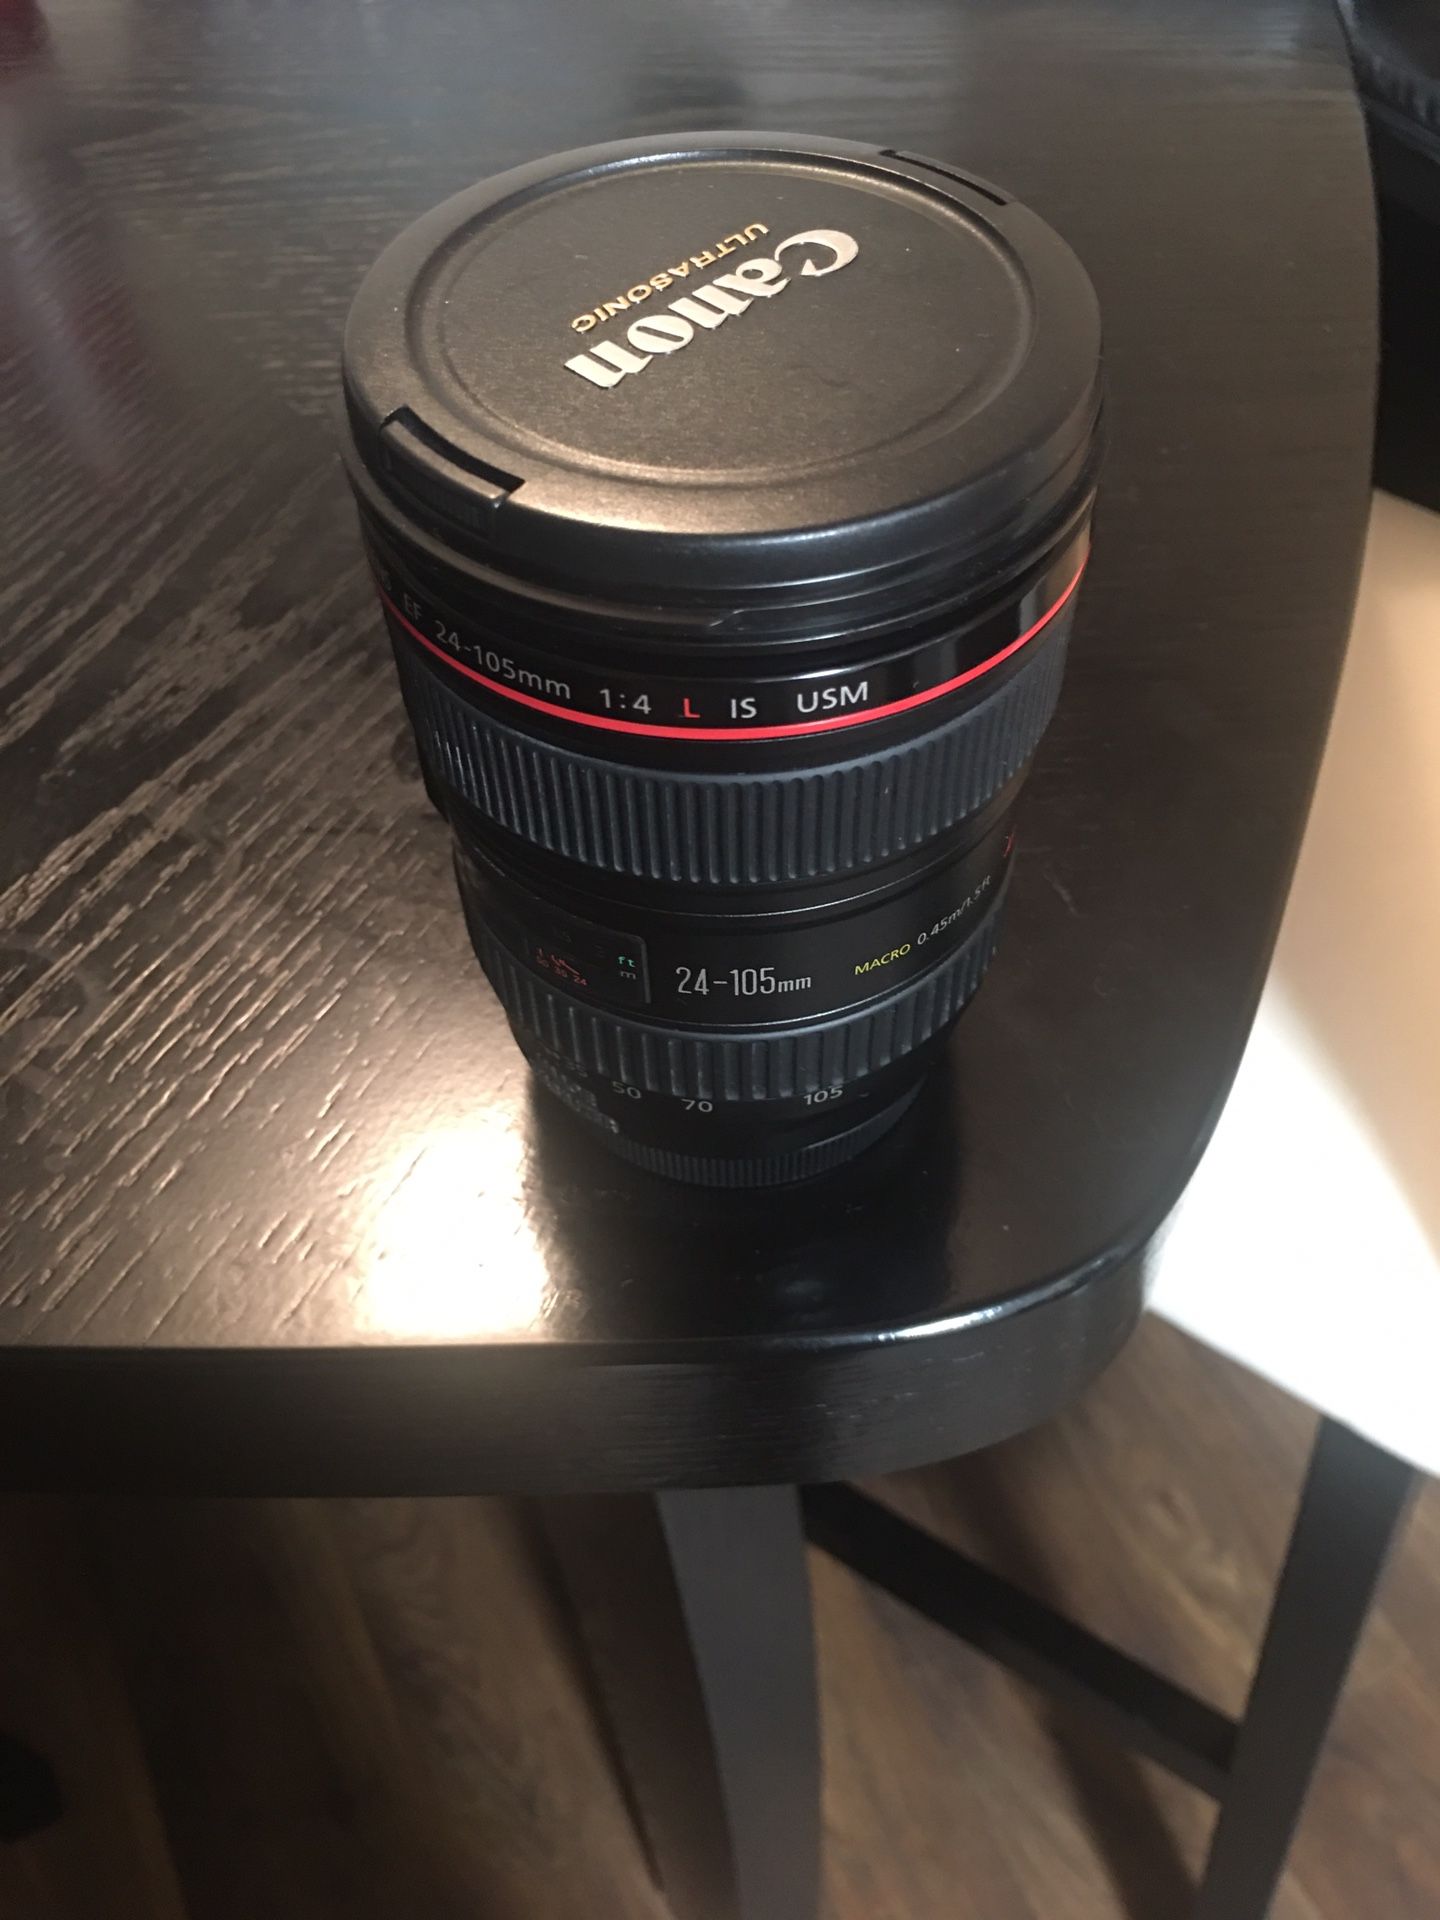 Canon lenses for sale 24-105, 851.8 and sigma art 35 1.4